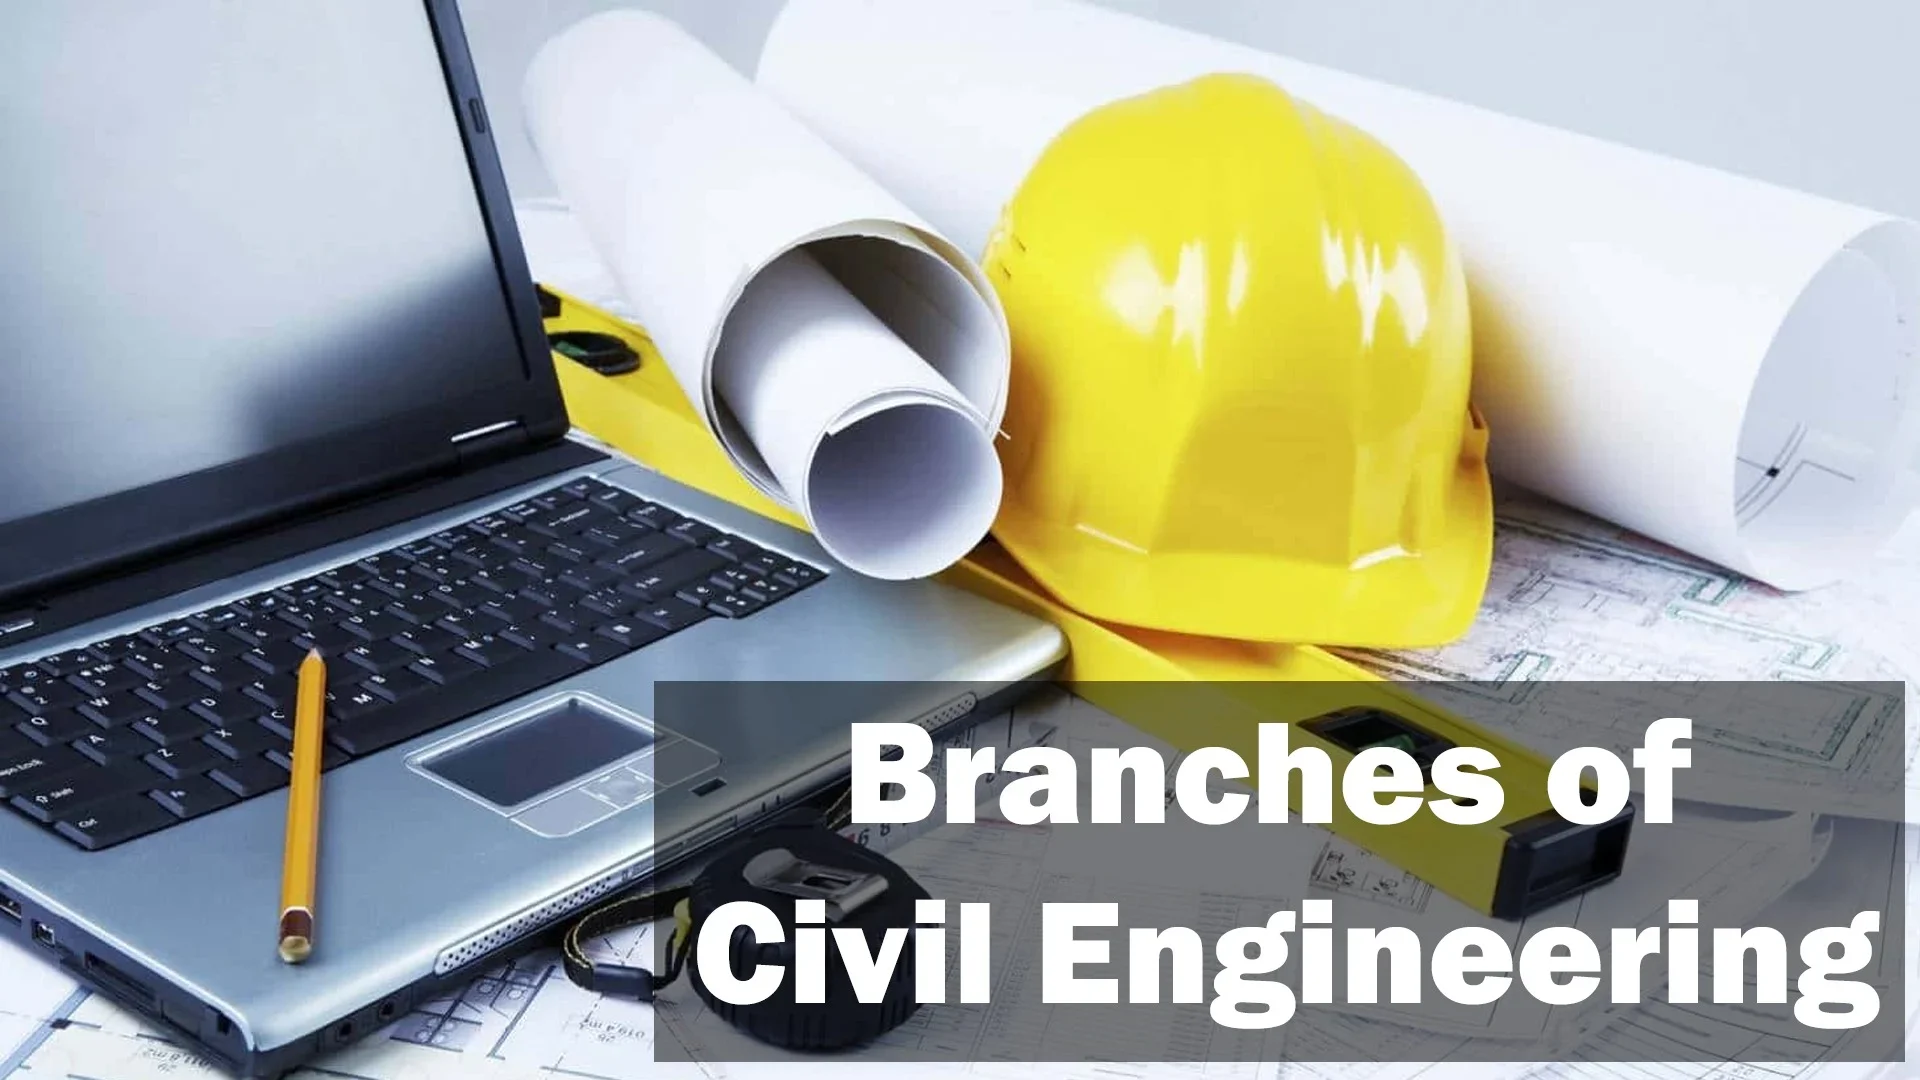 Branches of Civil Engineering